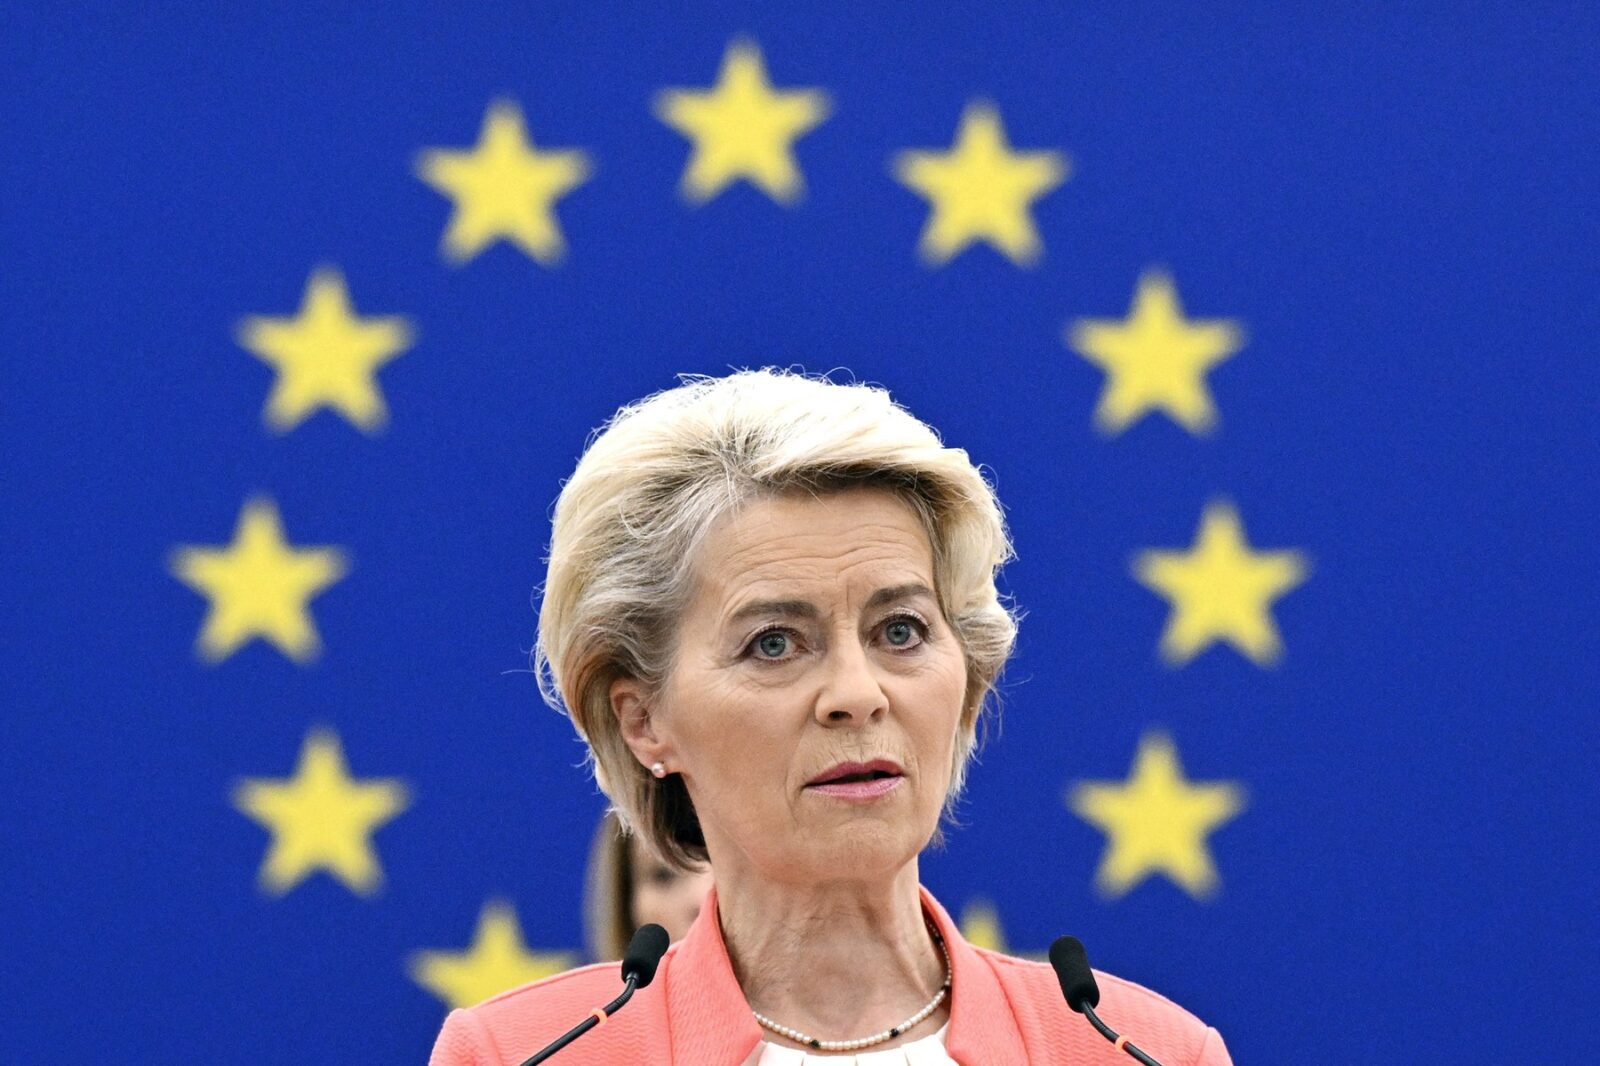 European Commission President Ursula von der Leyen delivers a speech during a debate on the Russian invasion of Ukraine, during a plenary session at the European Parliament in Strasbourg, eastern France, on October 5, 2022.,Image: 728247888, License: Rights-managed, Restrictions: , Model Release: no, Credit line: FREDERICK FLORIN / AFP / Profimedia